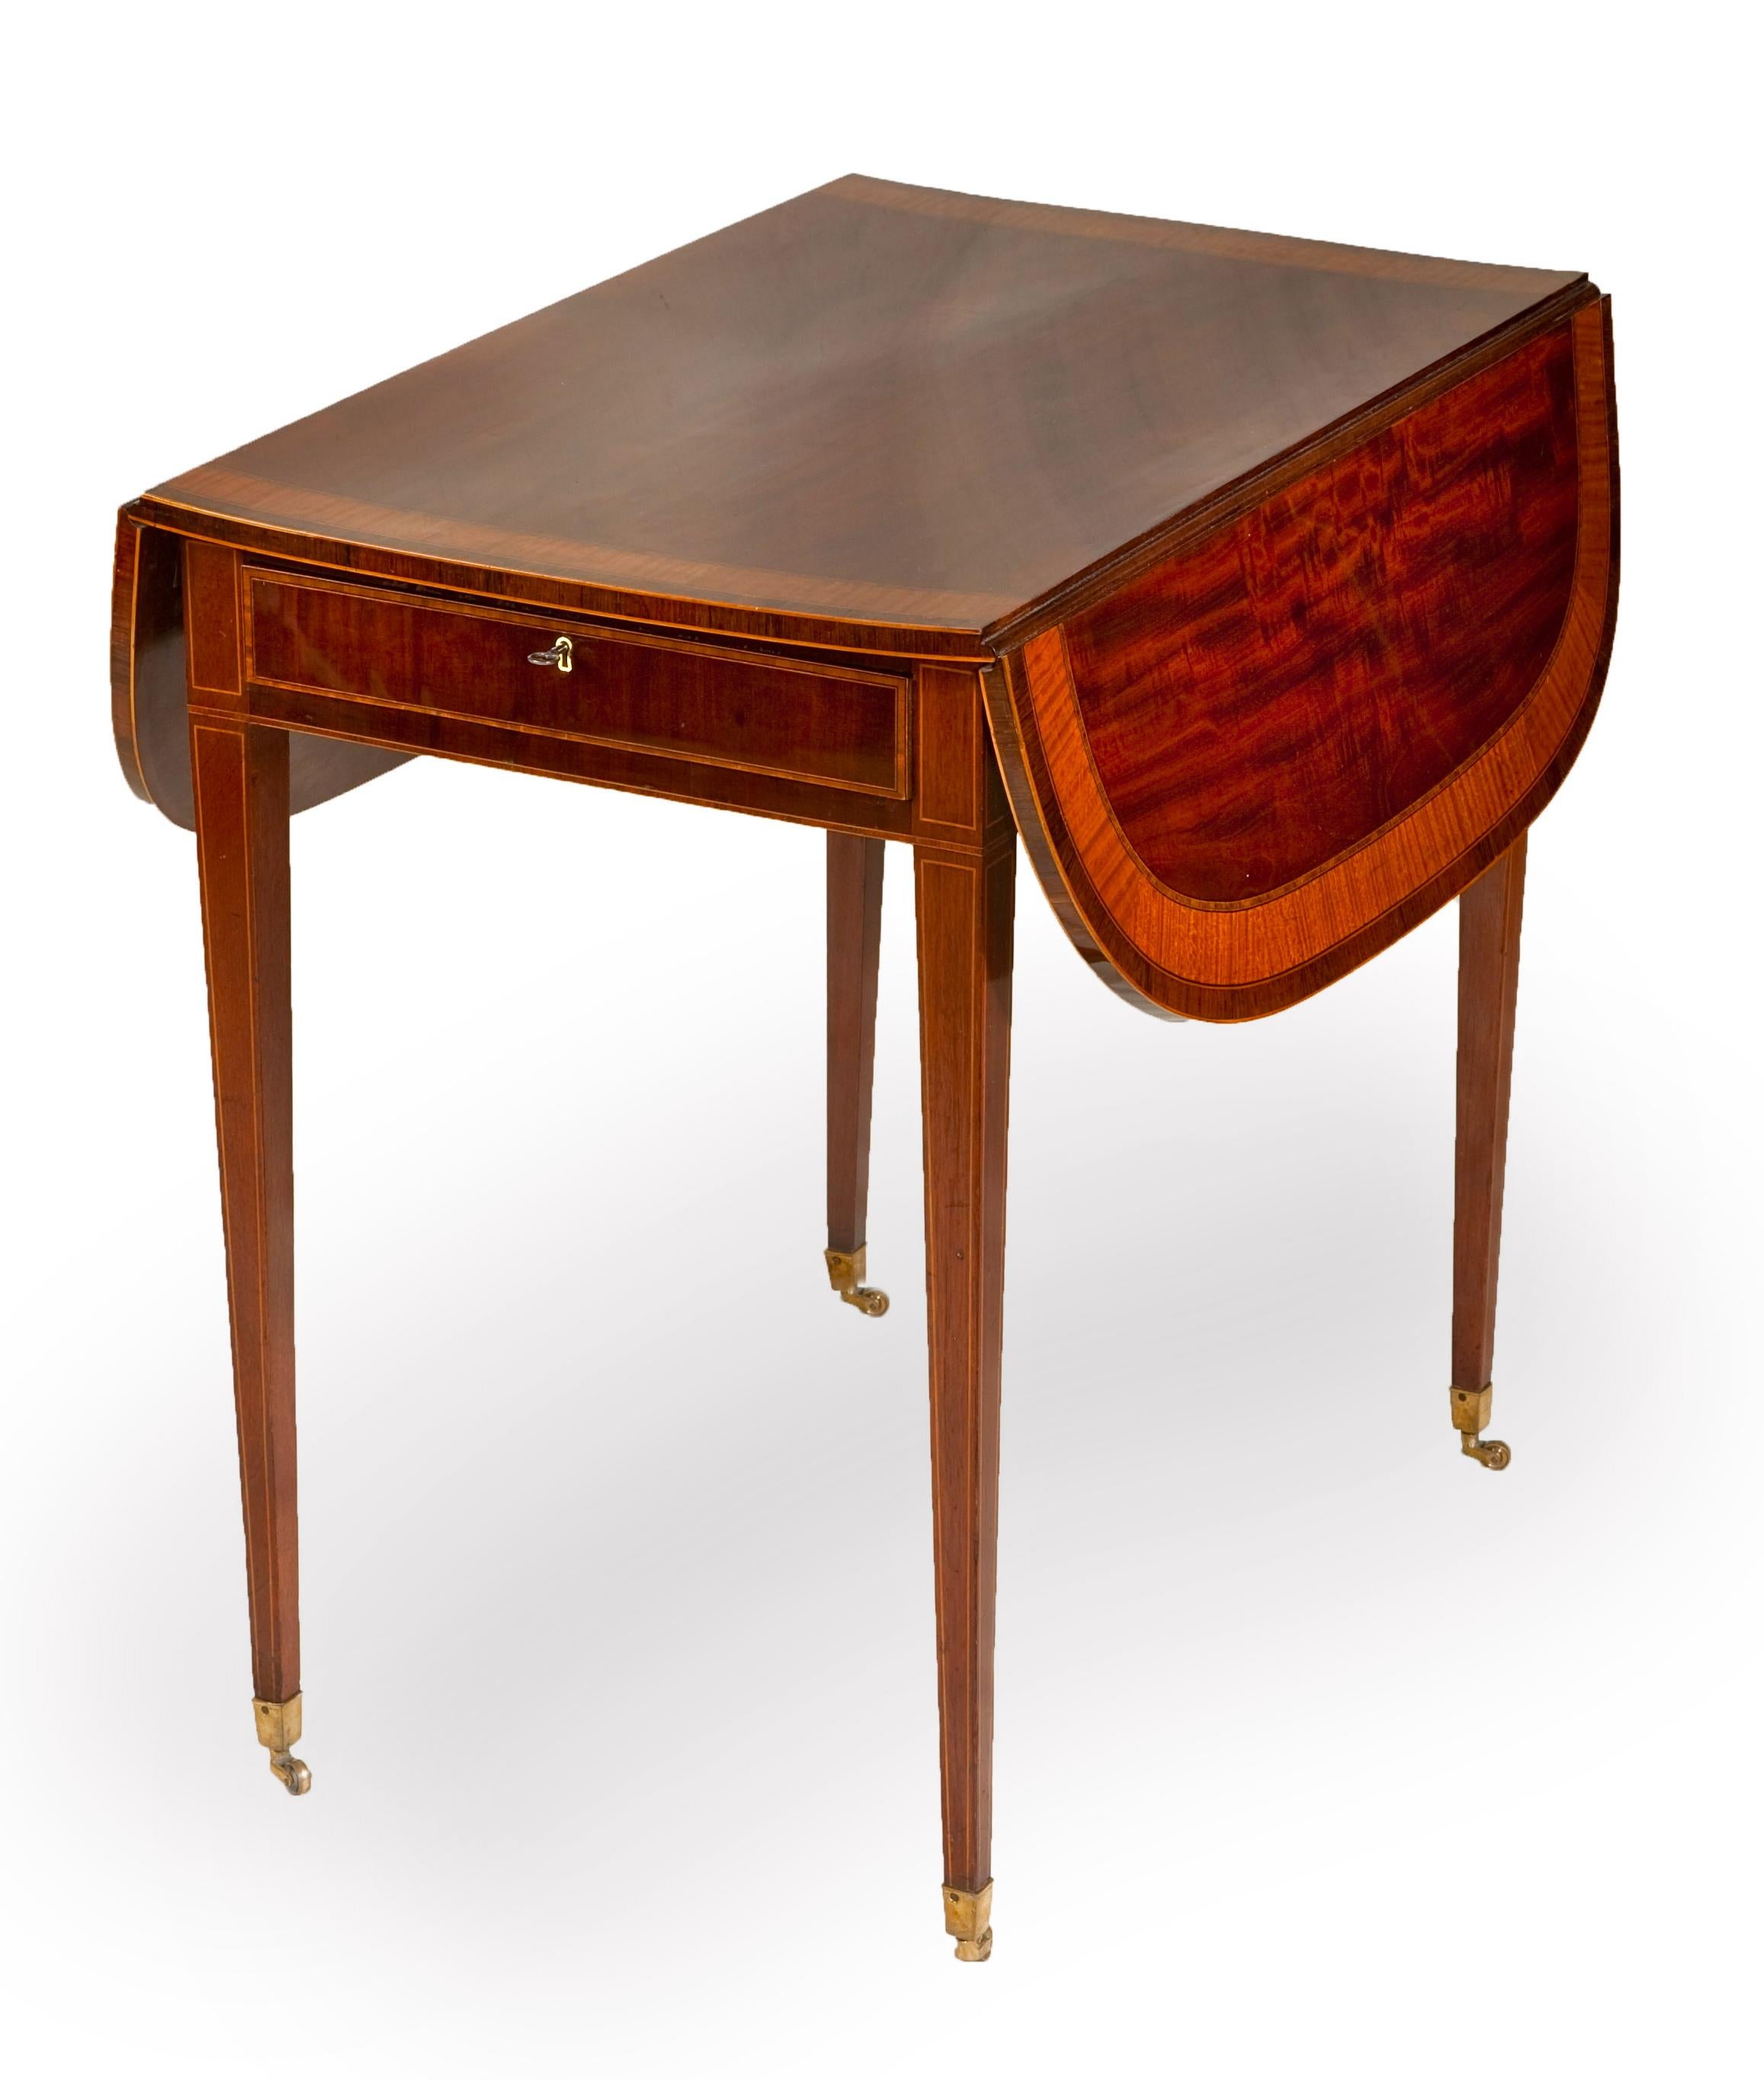 A Classic Pembroke table made of flame mahogany with satinwood and  tulip wood banding; single drawer to one side with lock and flaps on either side that can be raised by brackets on hinges (known as “elbows”) to increase its size. The table is